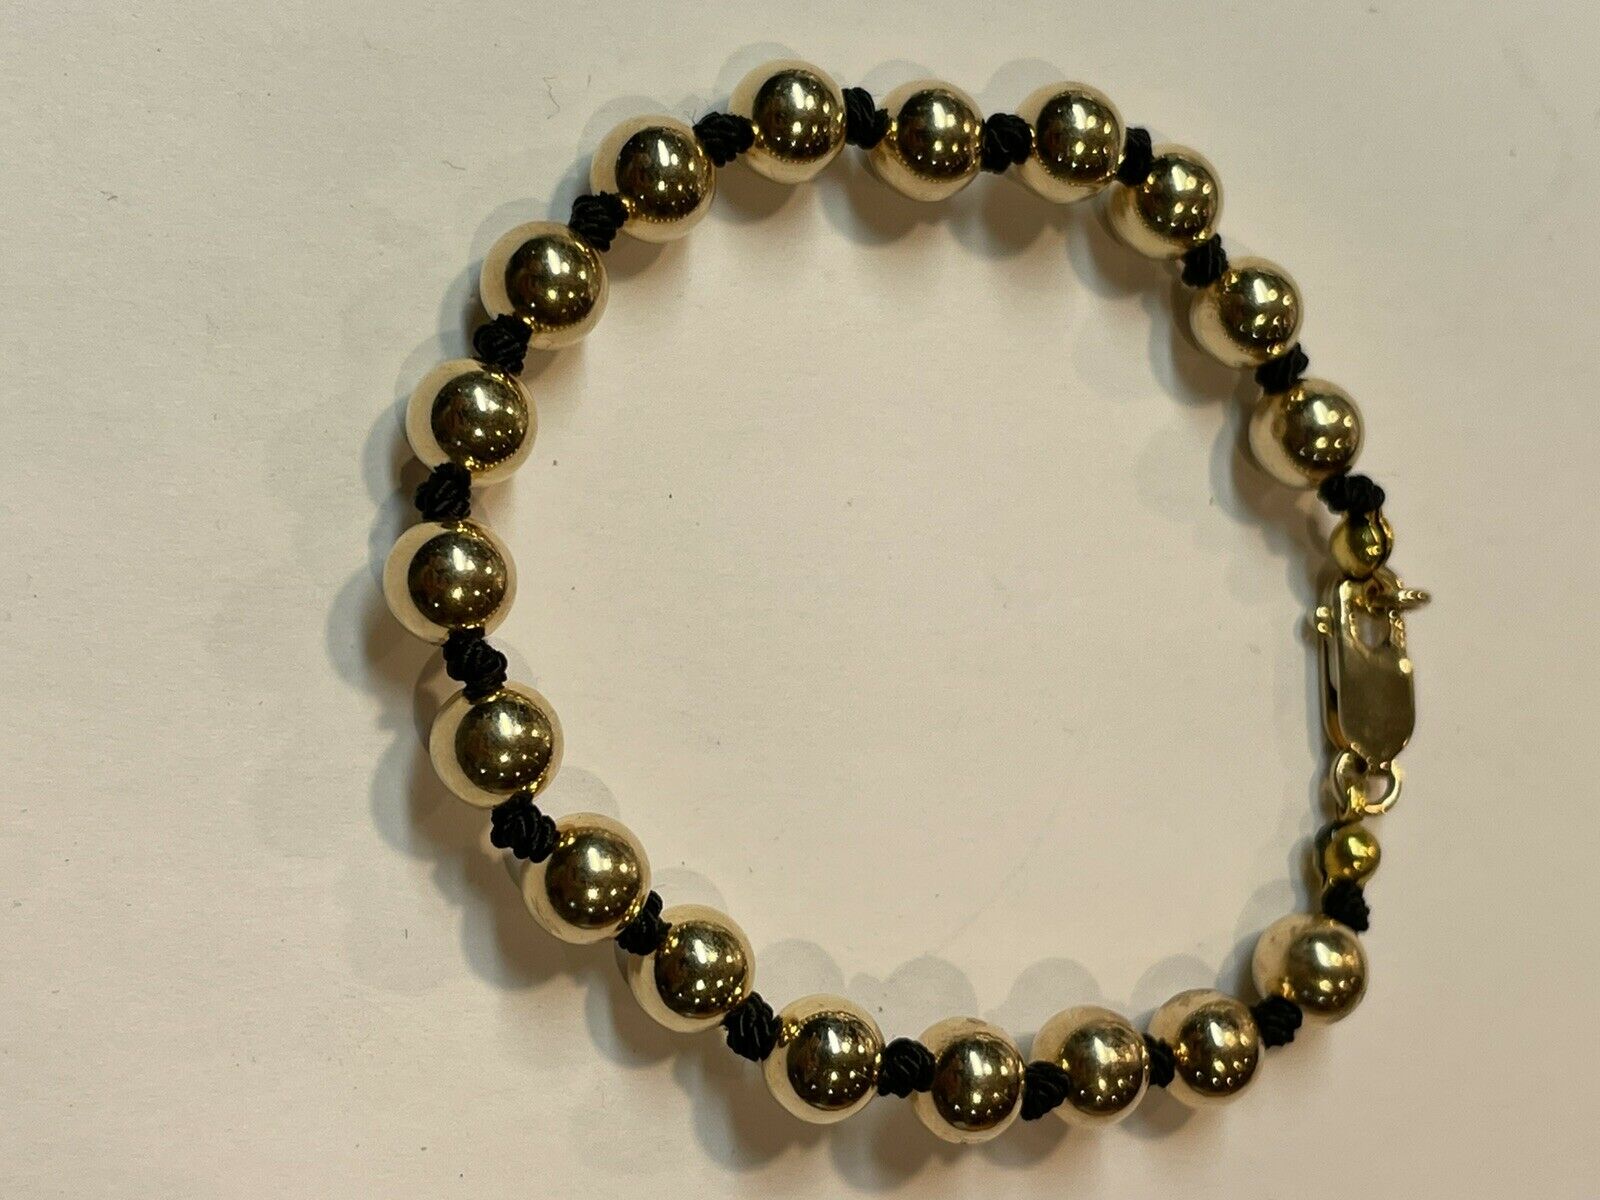 14k Gold Bead And Silk Bracelet with Lobster Clasp 7mm Beads 7.5”